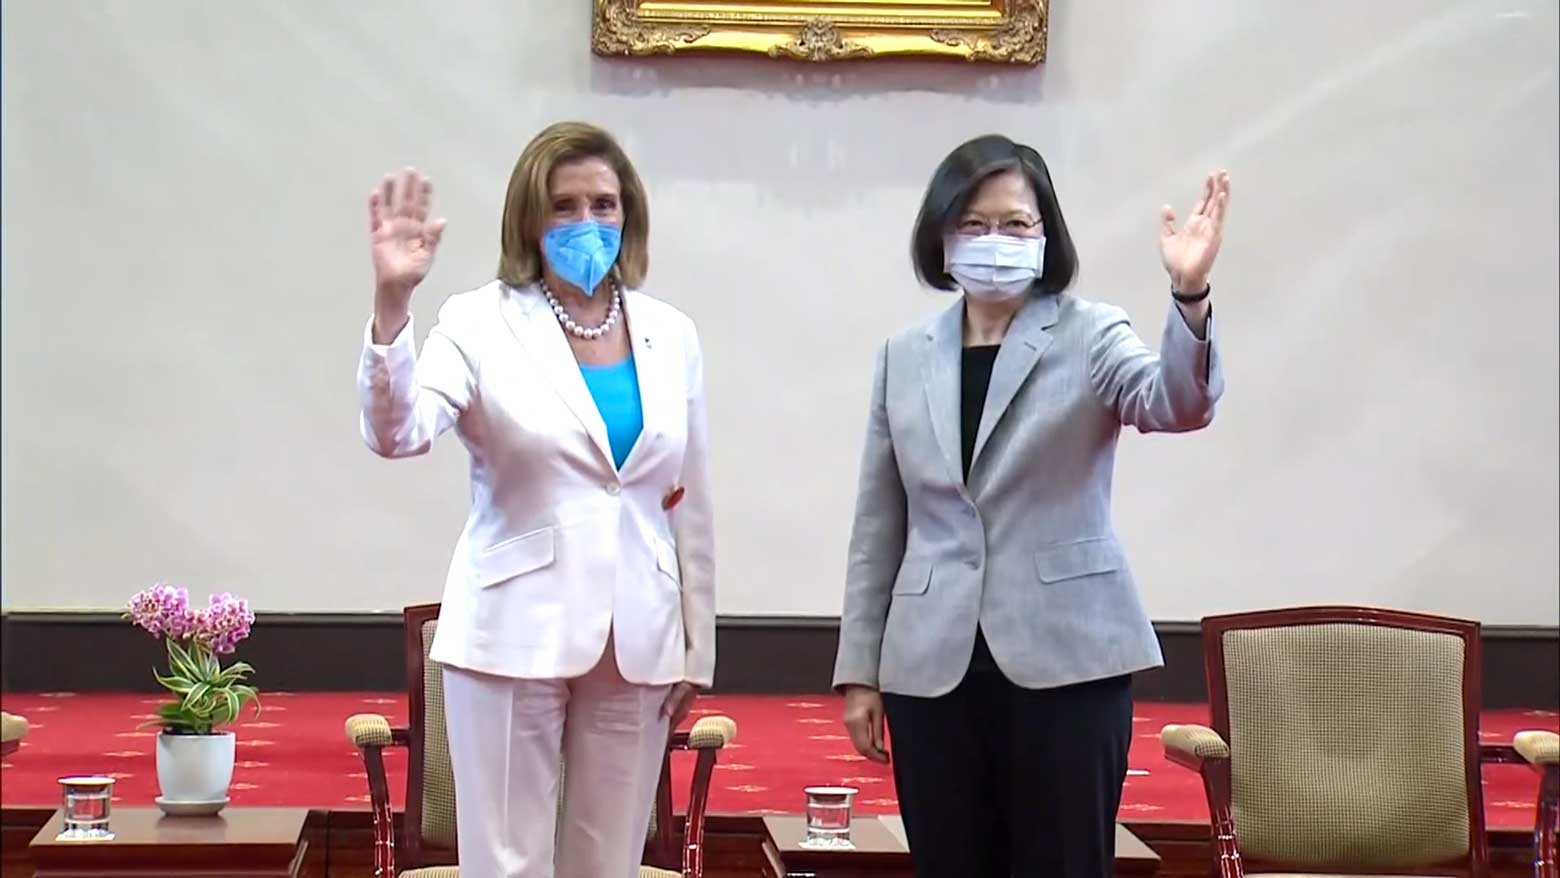 Why Pelosi's visit to Taiwan crossed a line for China